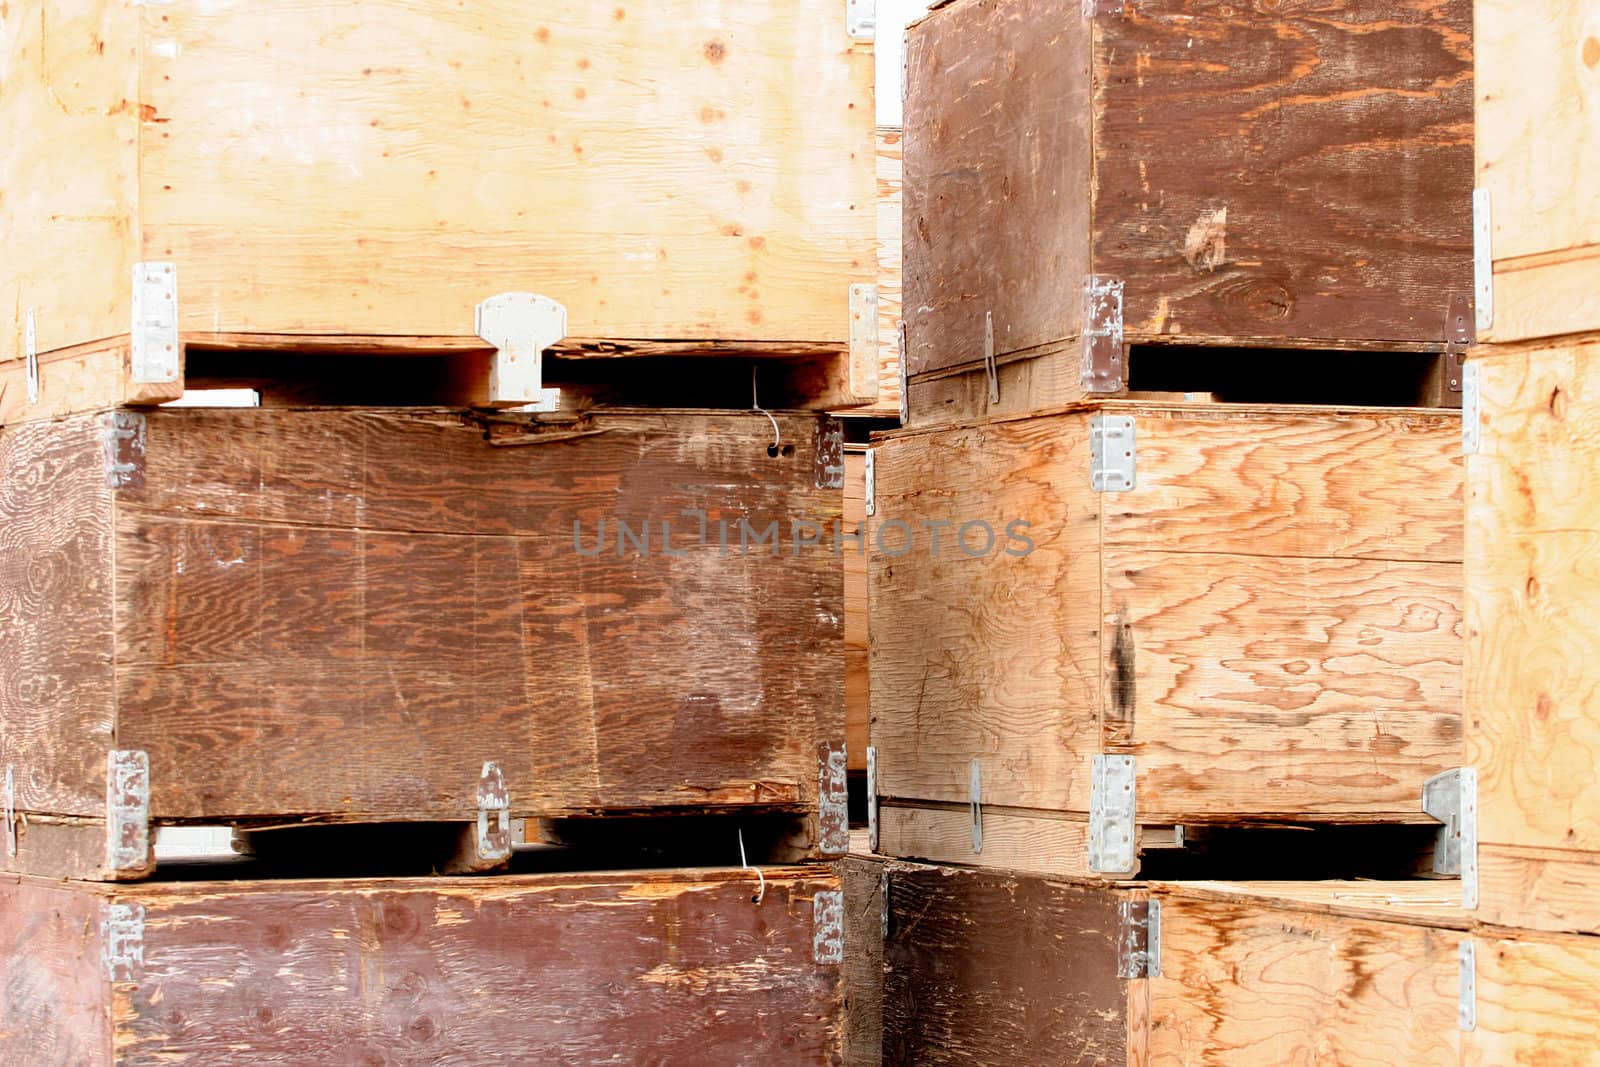 Different colors and textures of potato crates waiting for harvested potatoes